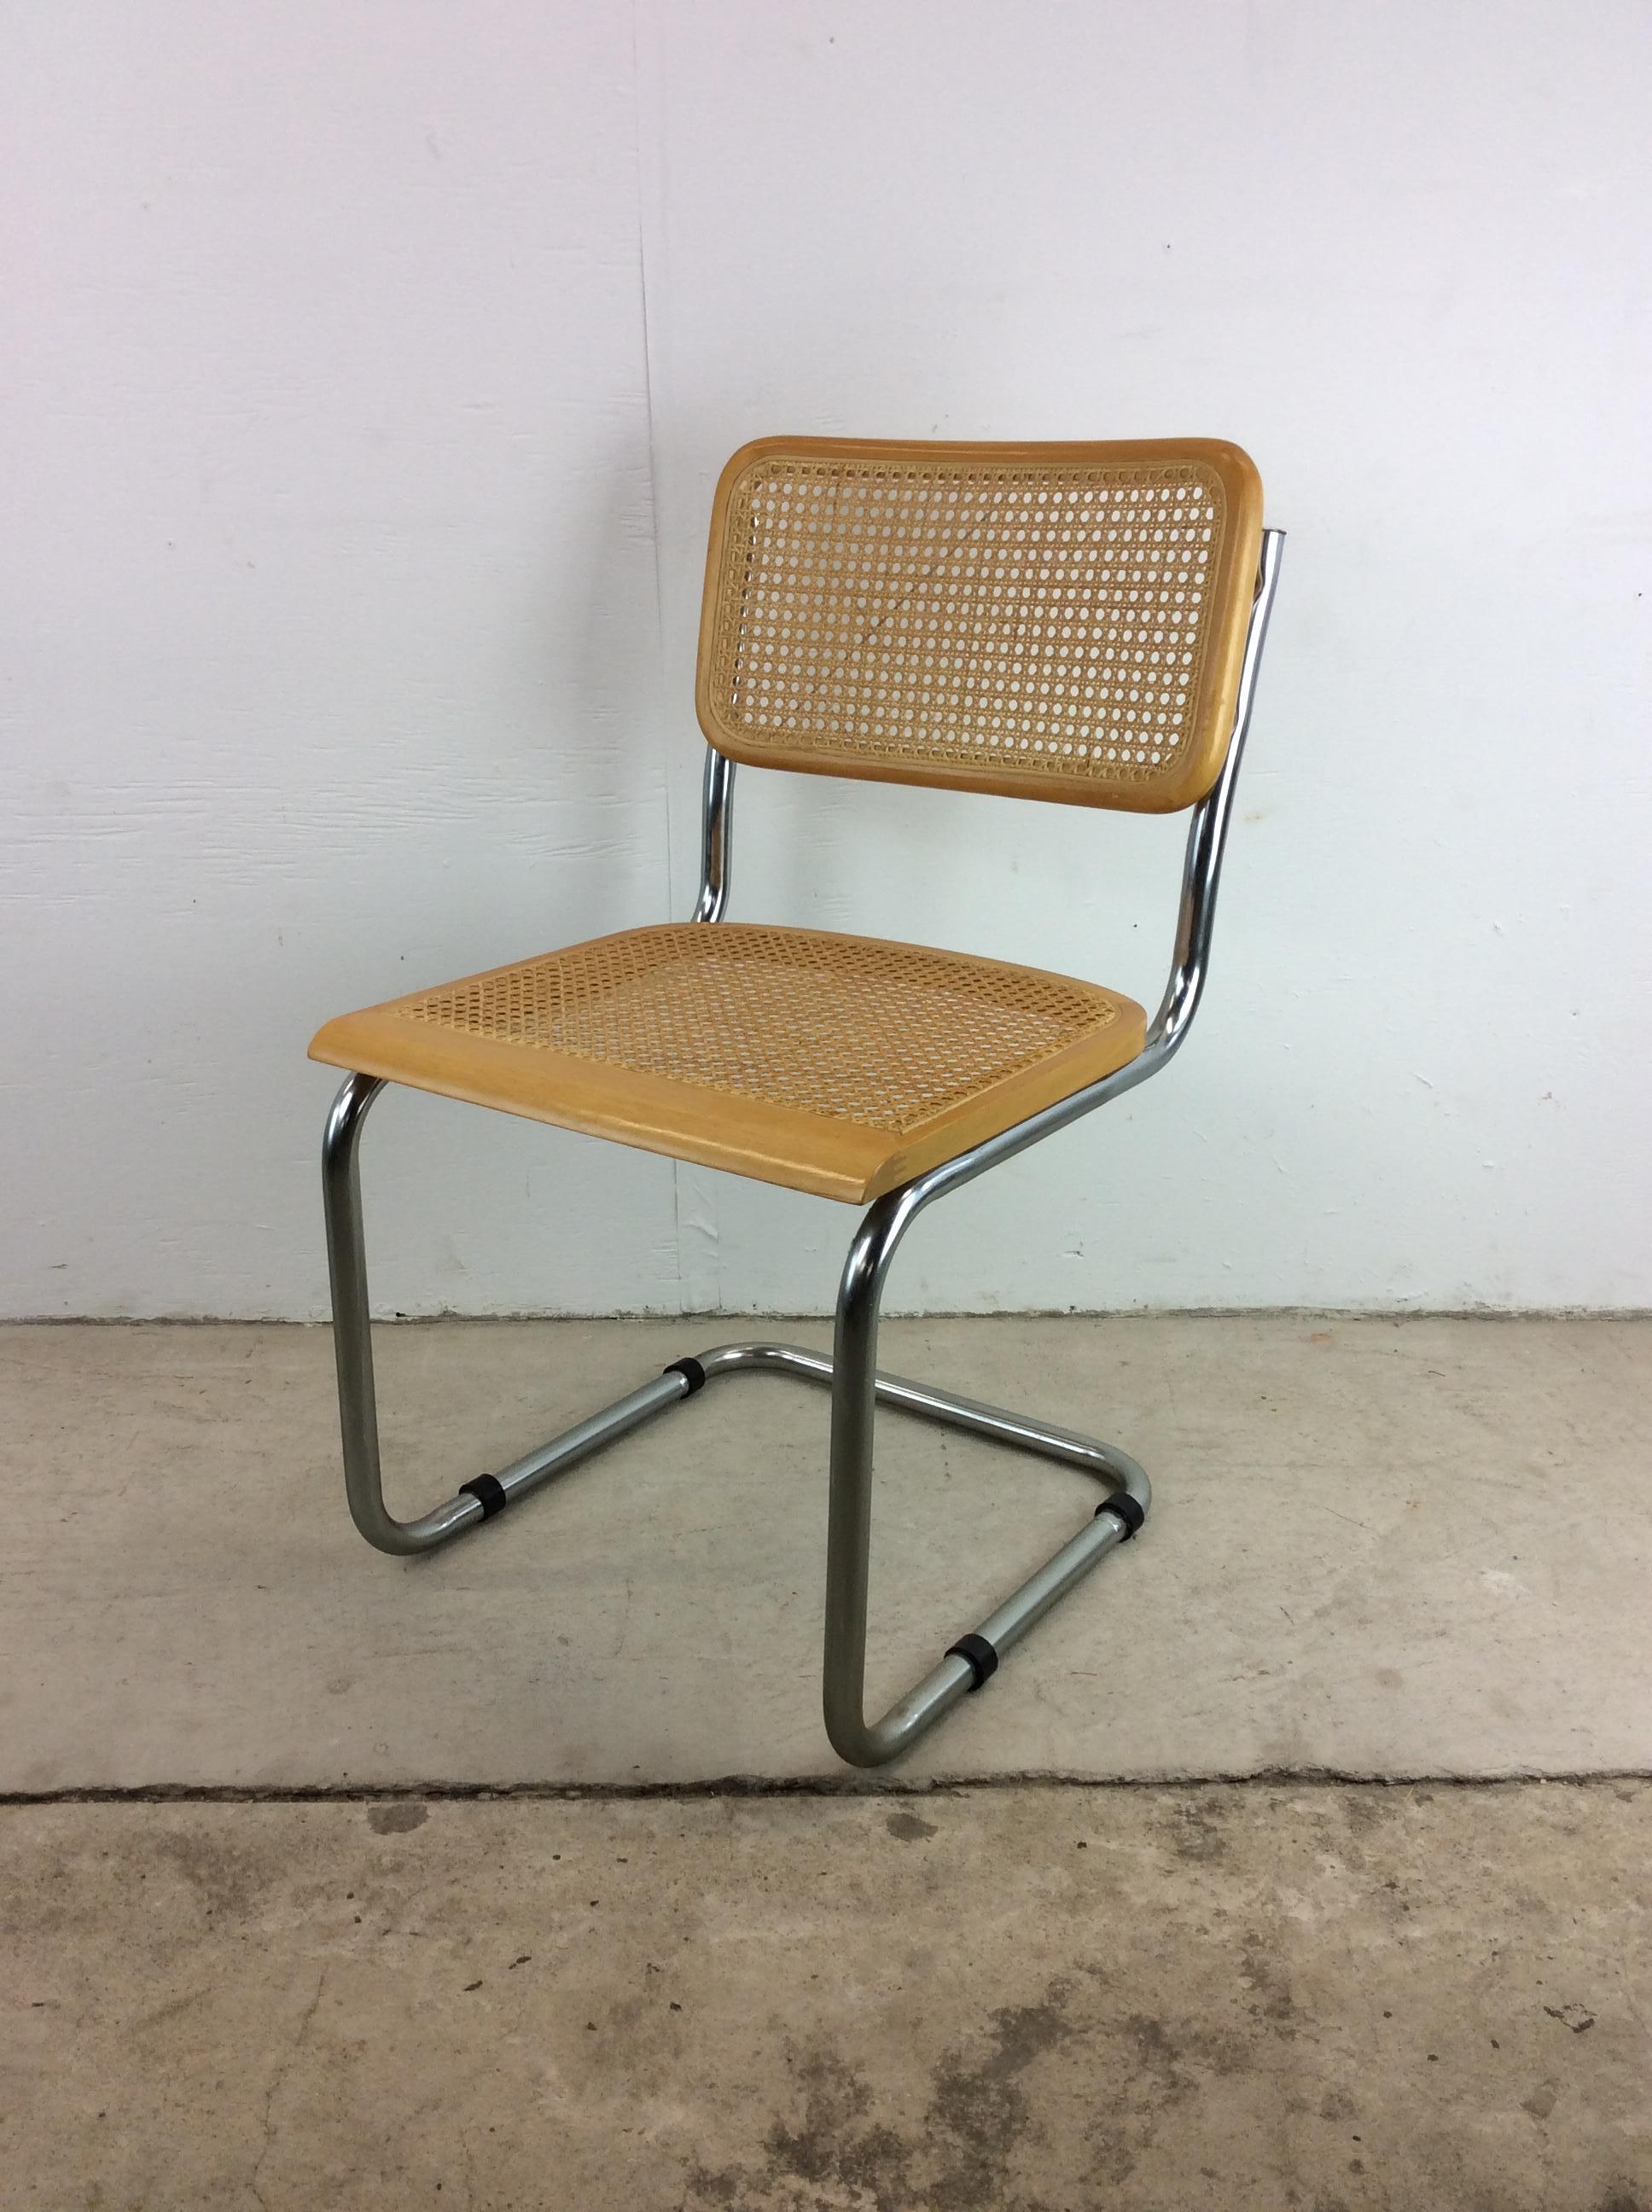 This mid century modern cesca style chair features caned seat & seat back on a chrome cantilever base in the style of Marcel Breuer. 
Dimensions: 18w 20d 32h 17.5sh

Condition: Original finish is in excellent condition.  Only minor scuffs, slight